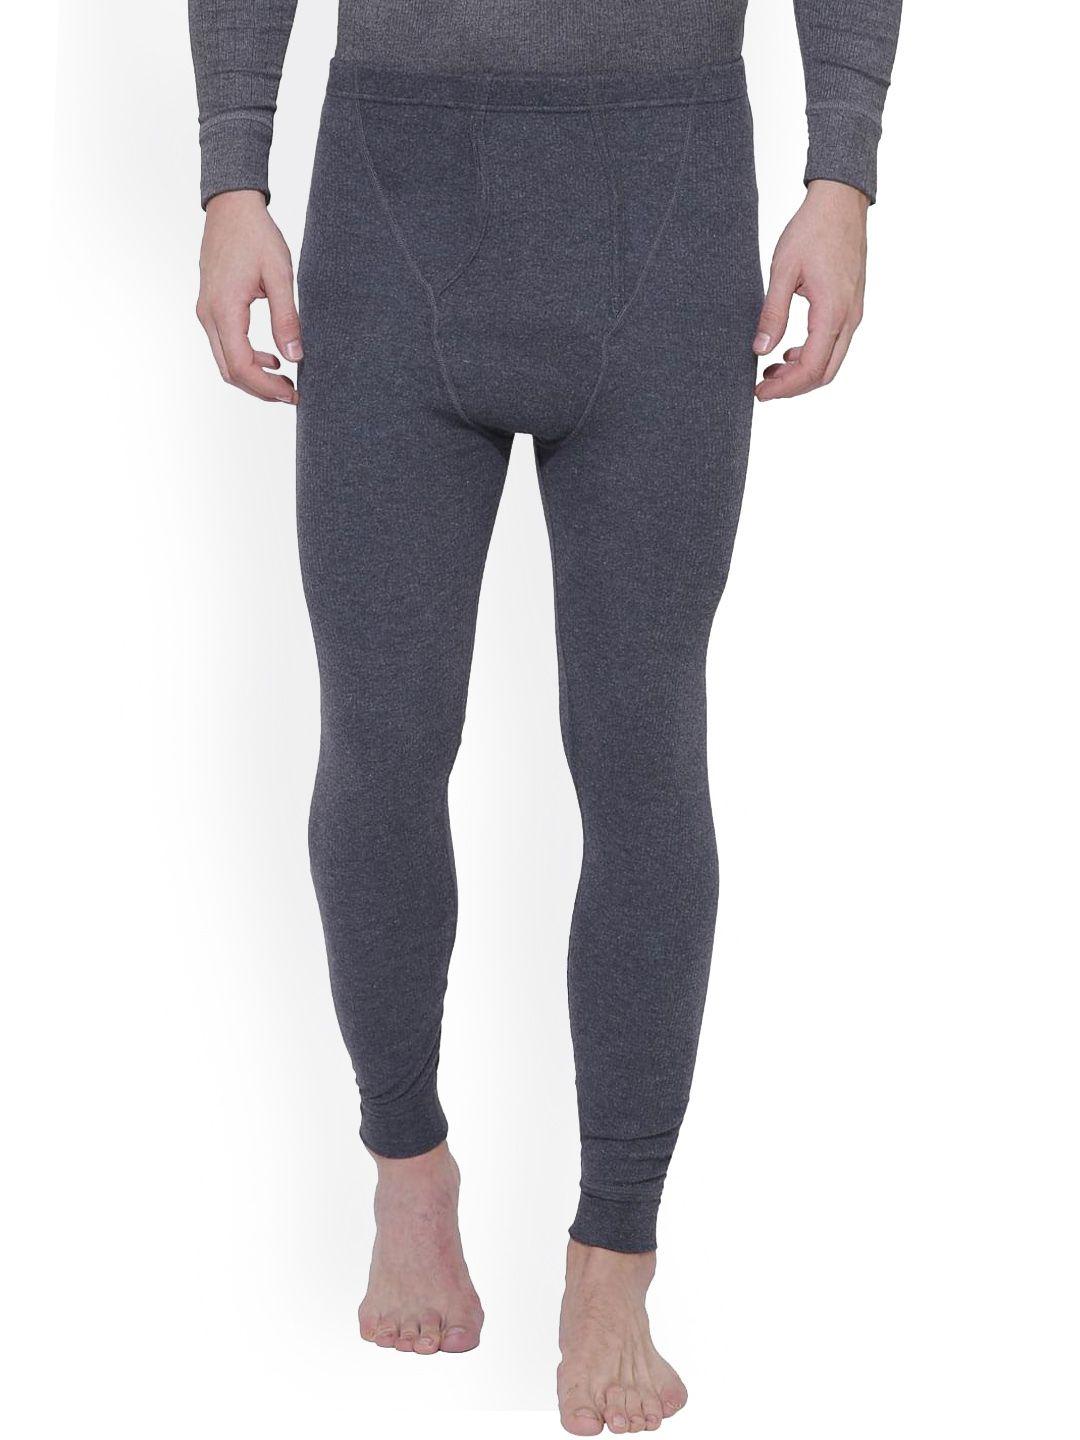 bodycare insider men charcoal solid cotton thermal bottoms